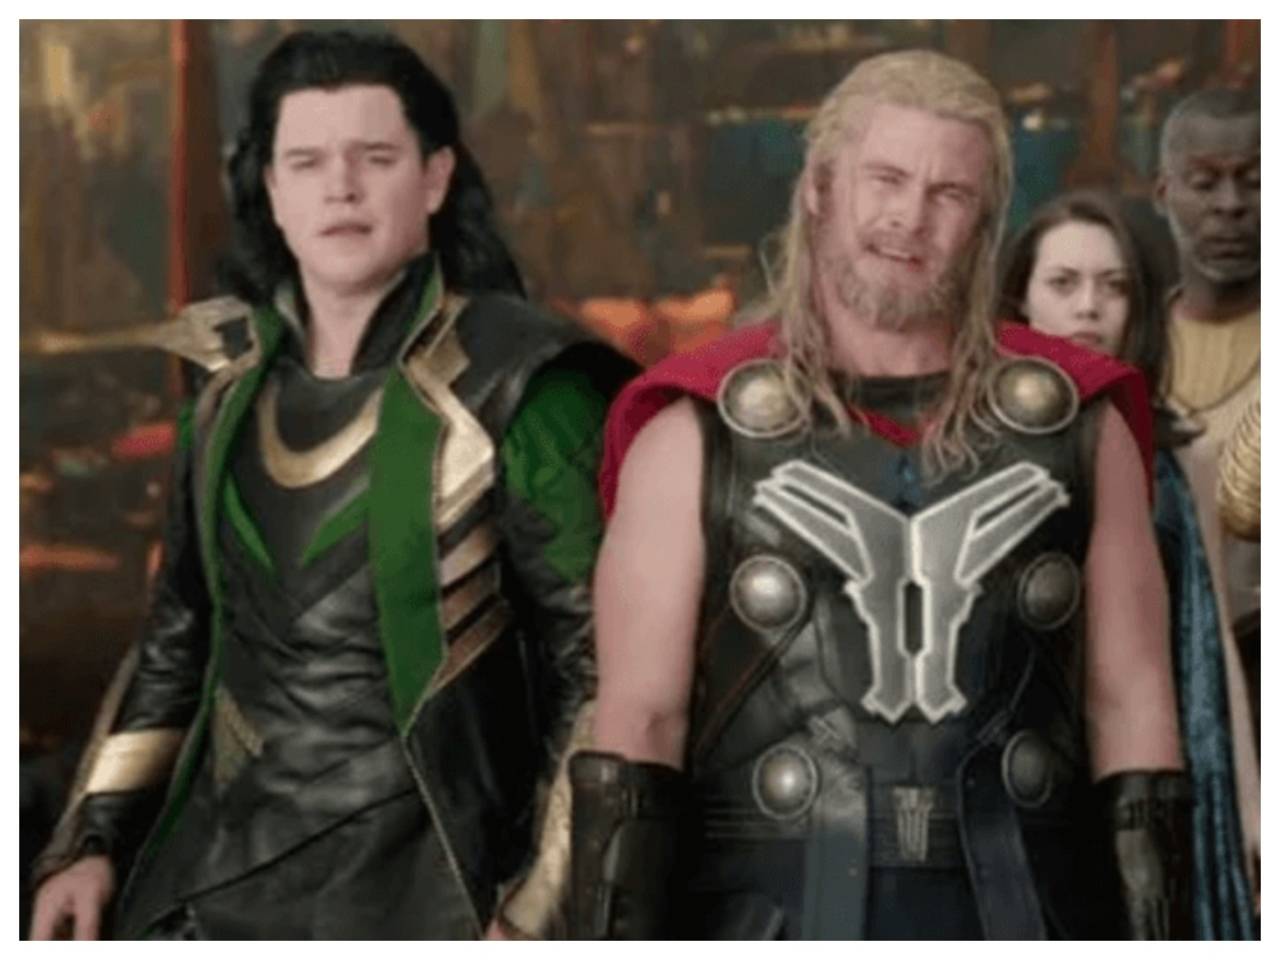 Matt Damon fuels speculation about his casting in Chris Hemsworth's 'Thor:  Love and Thunder